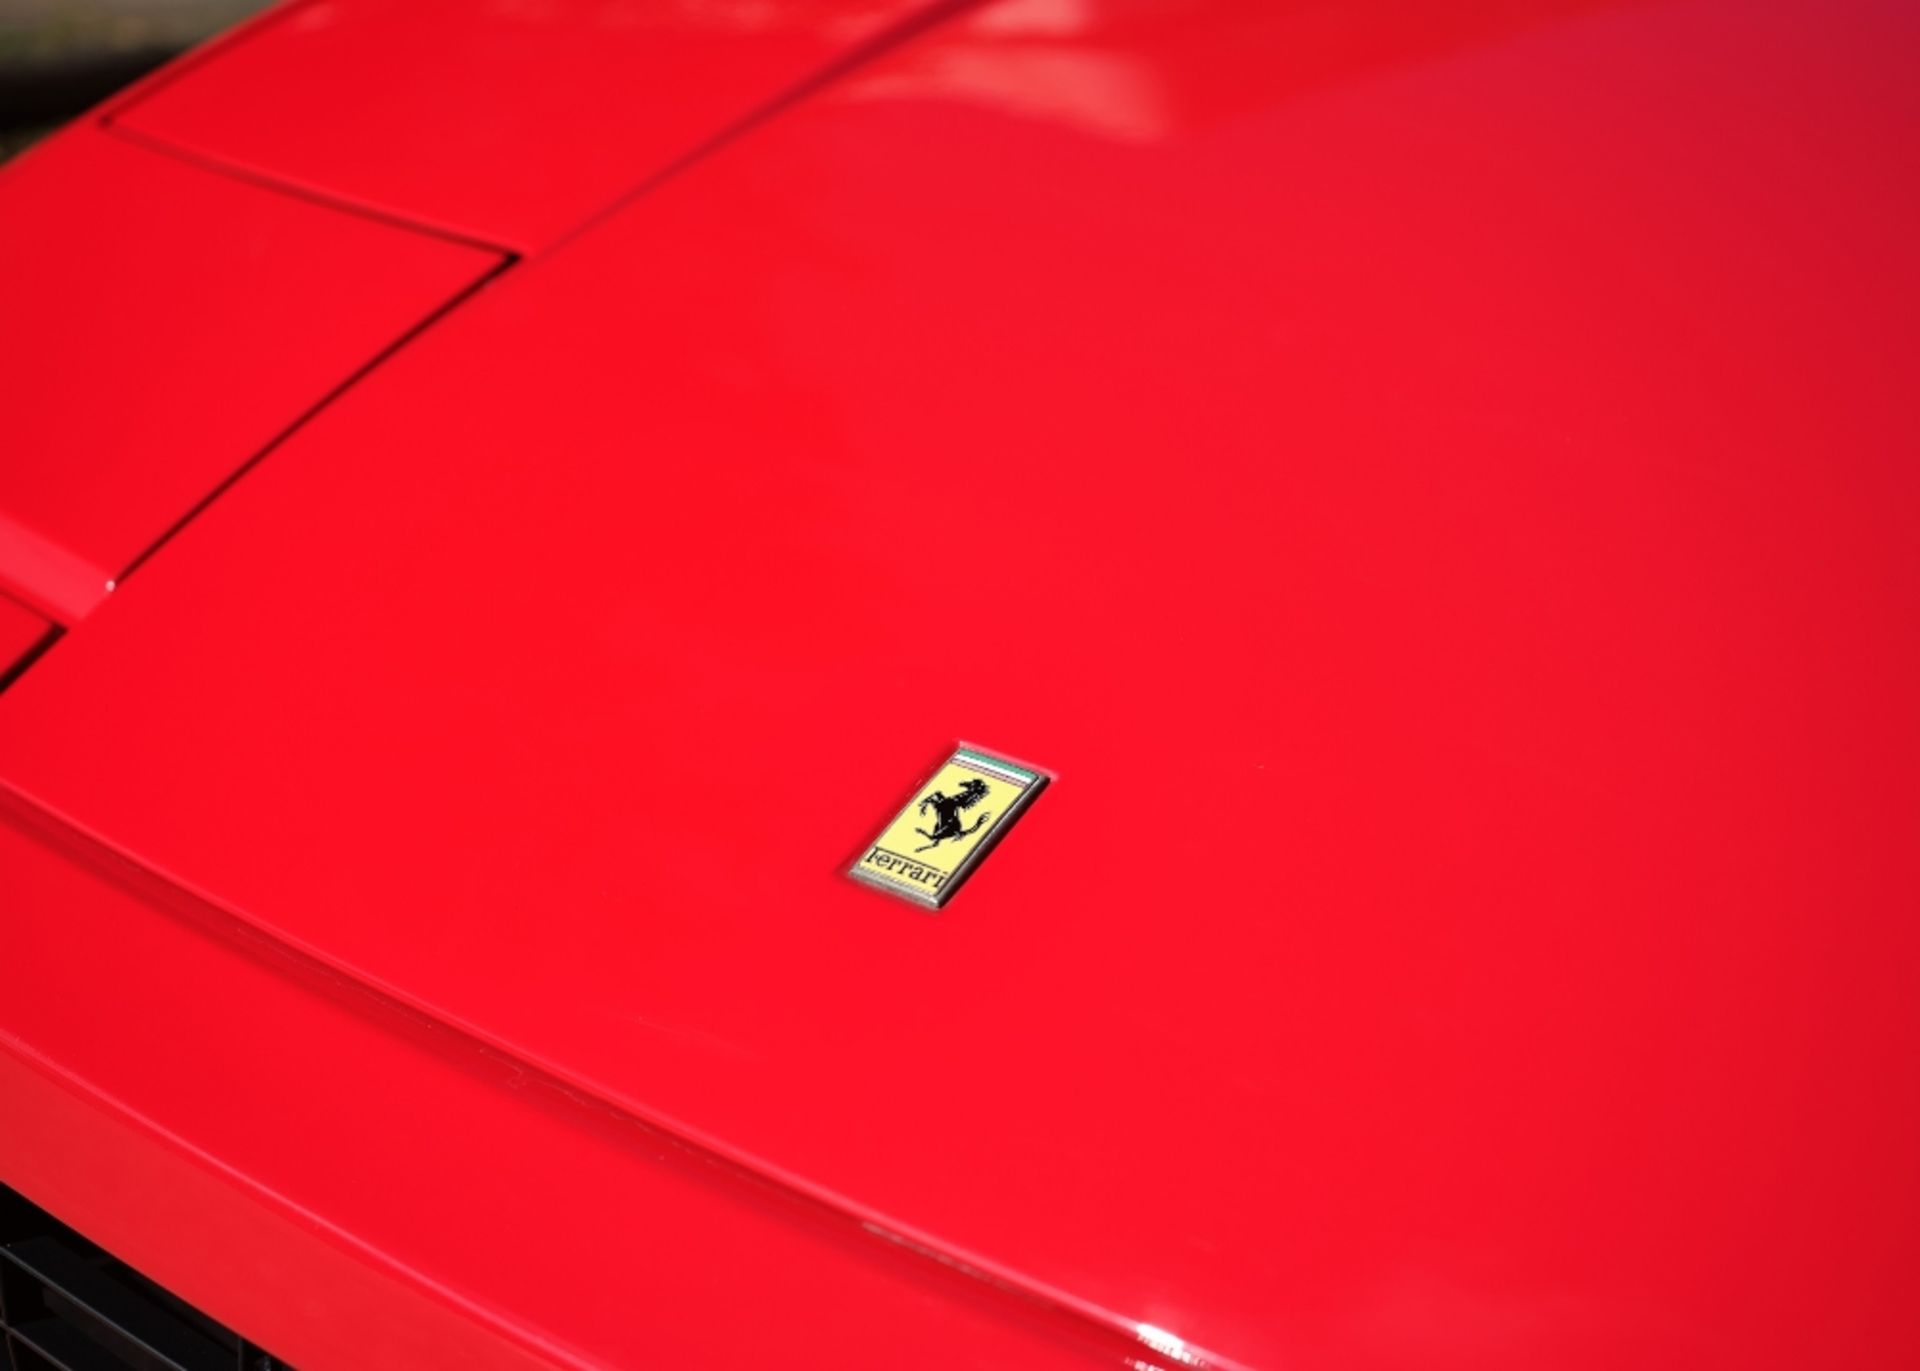 1989 FERRARI TESTAROSSA Registration Number: G441 WPN Chassis Number: ZFFAA17C000082817 Recorded - Image 17 of 59